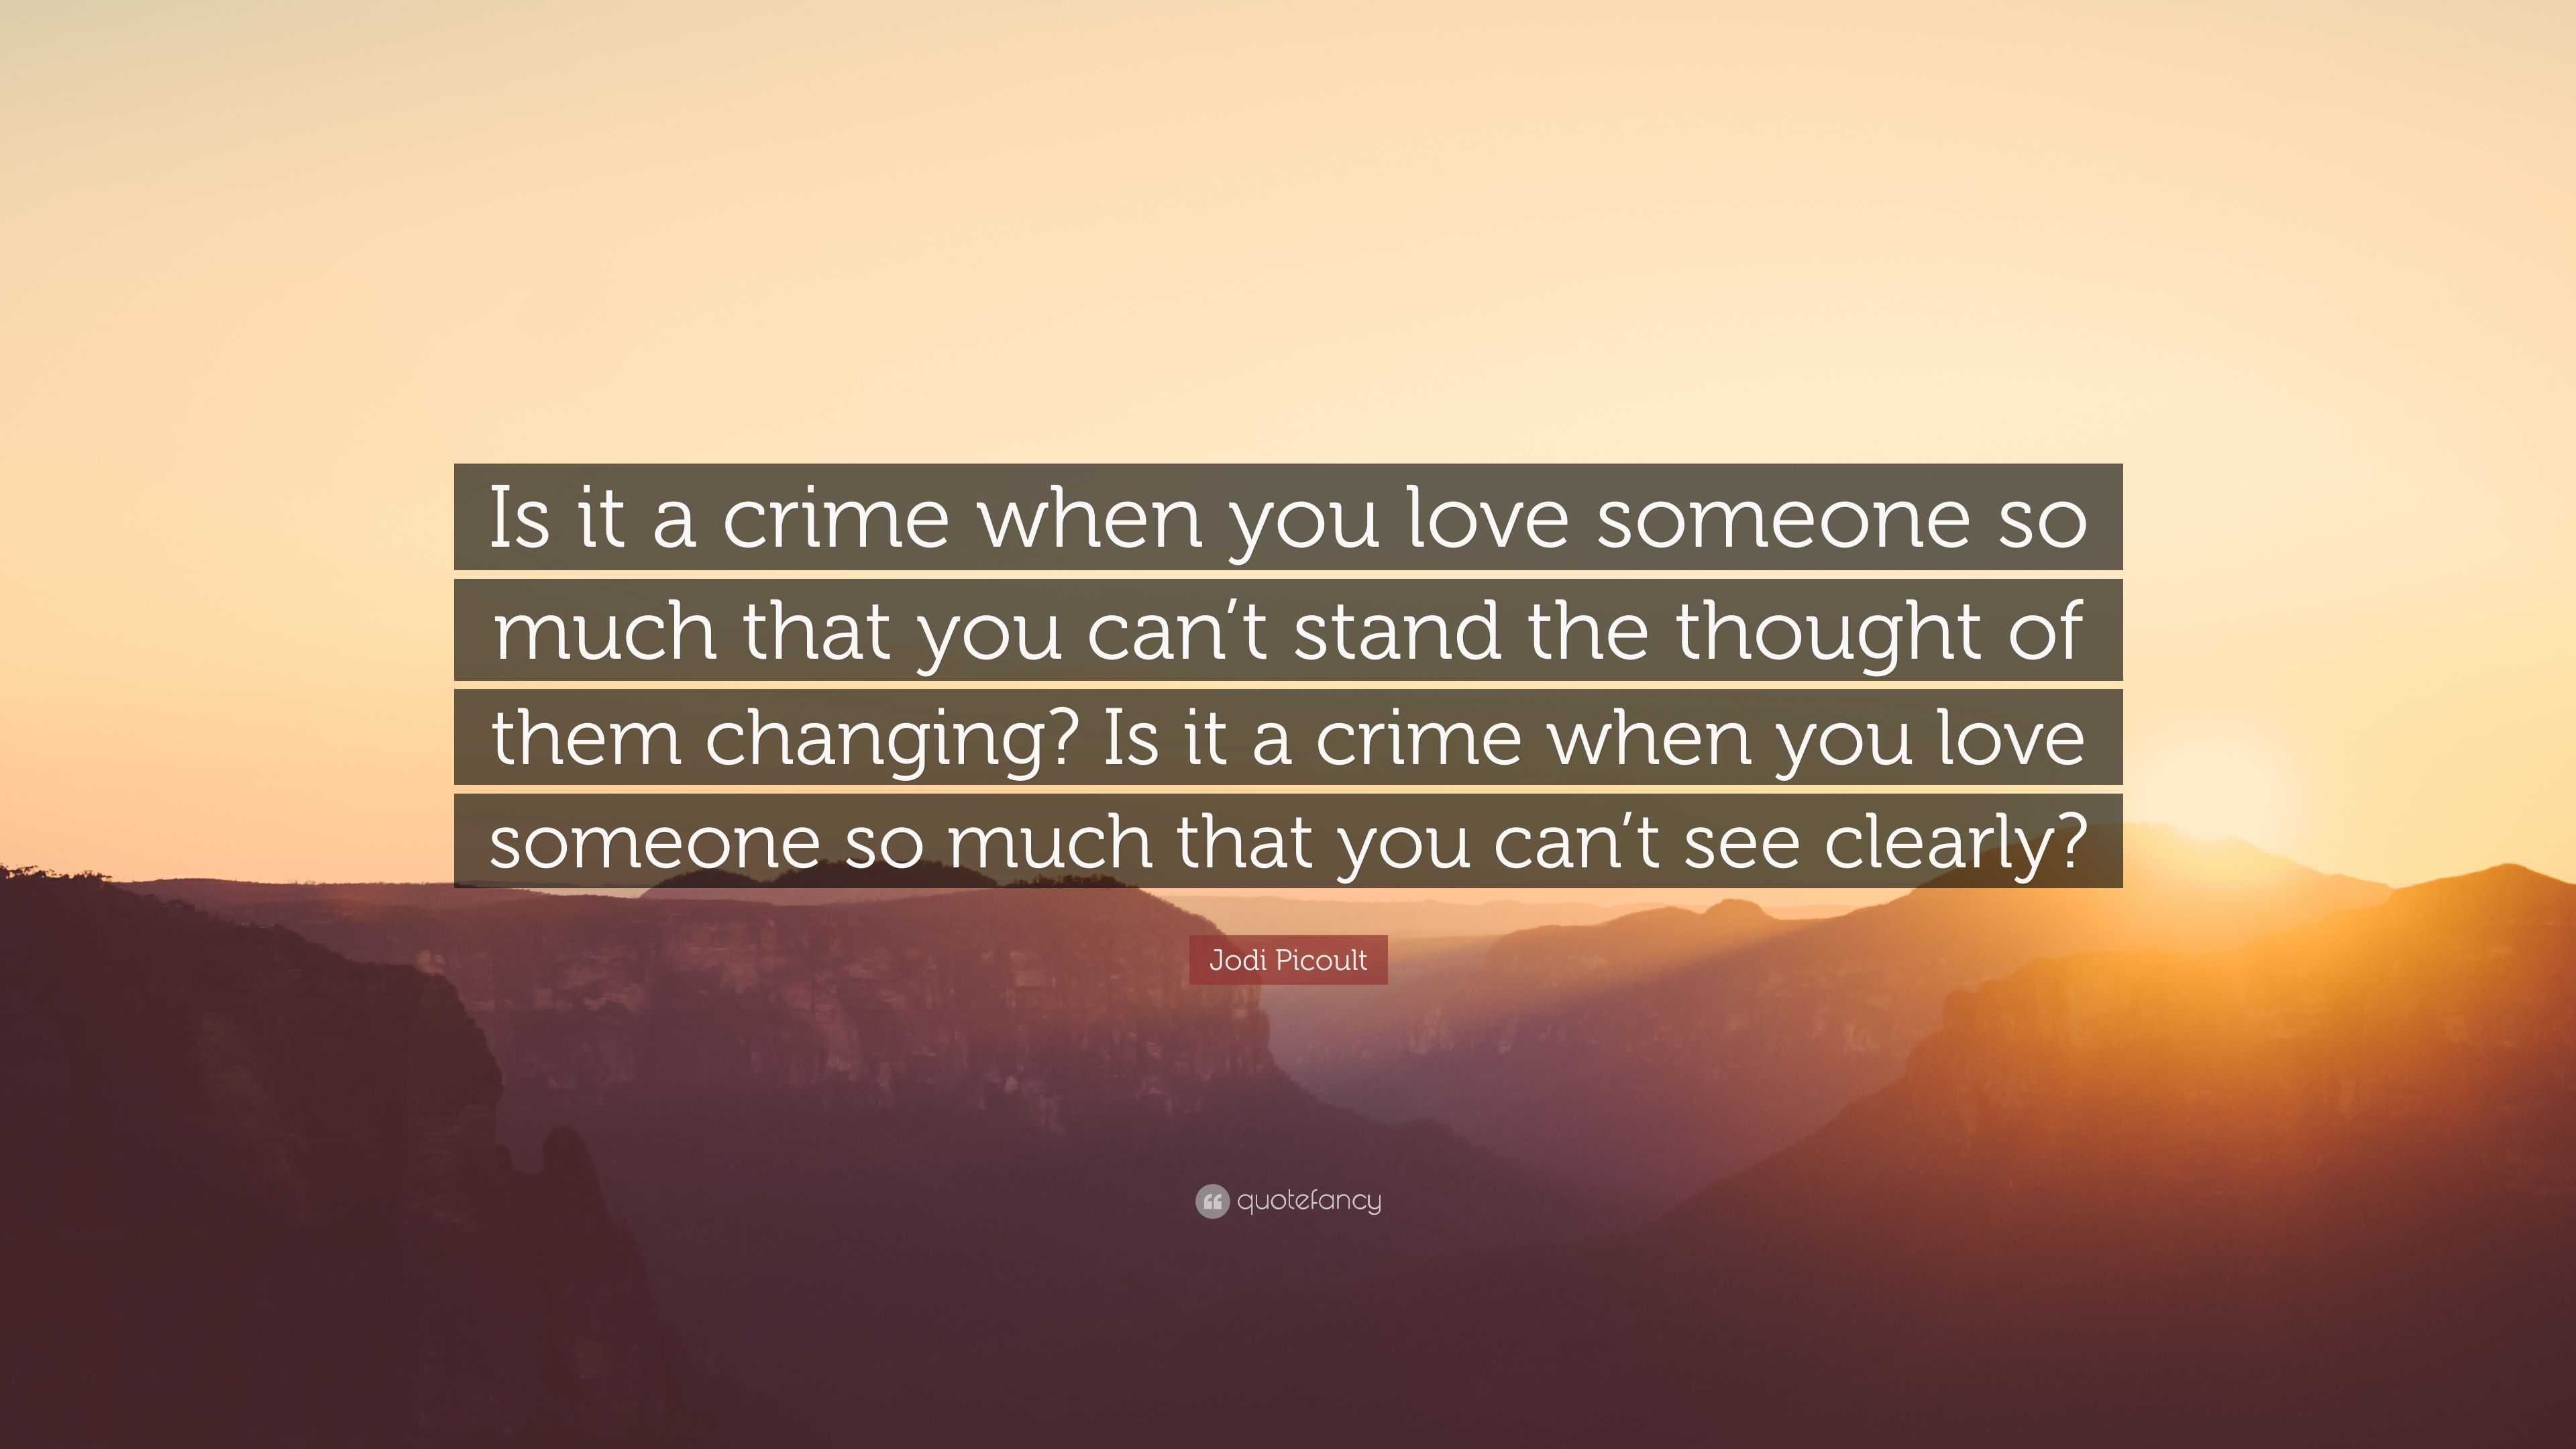 Jodi Picoult Quote “Is it a crime when you love someone so much that